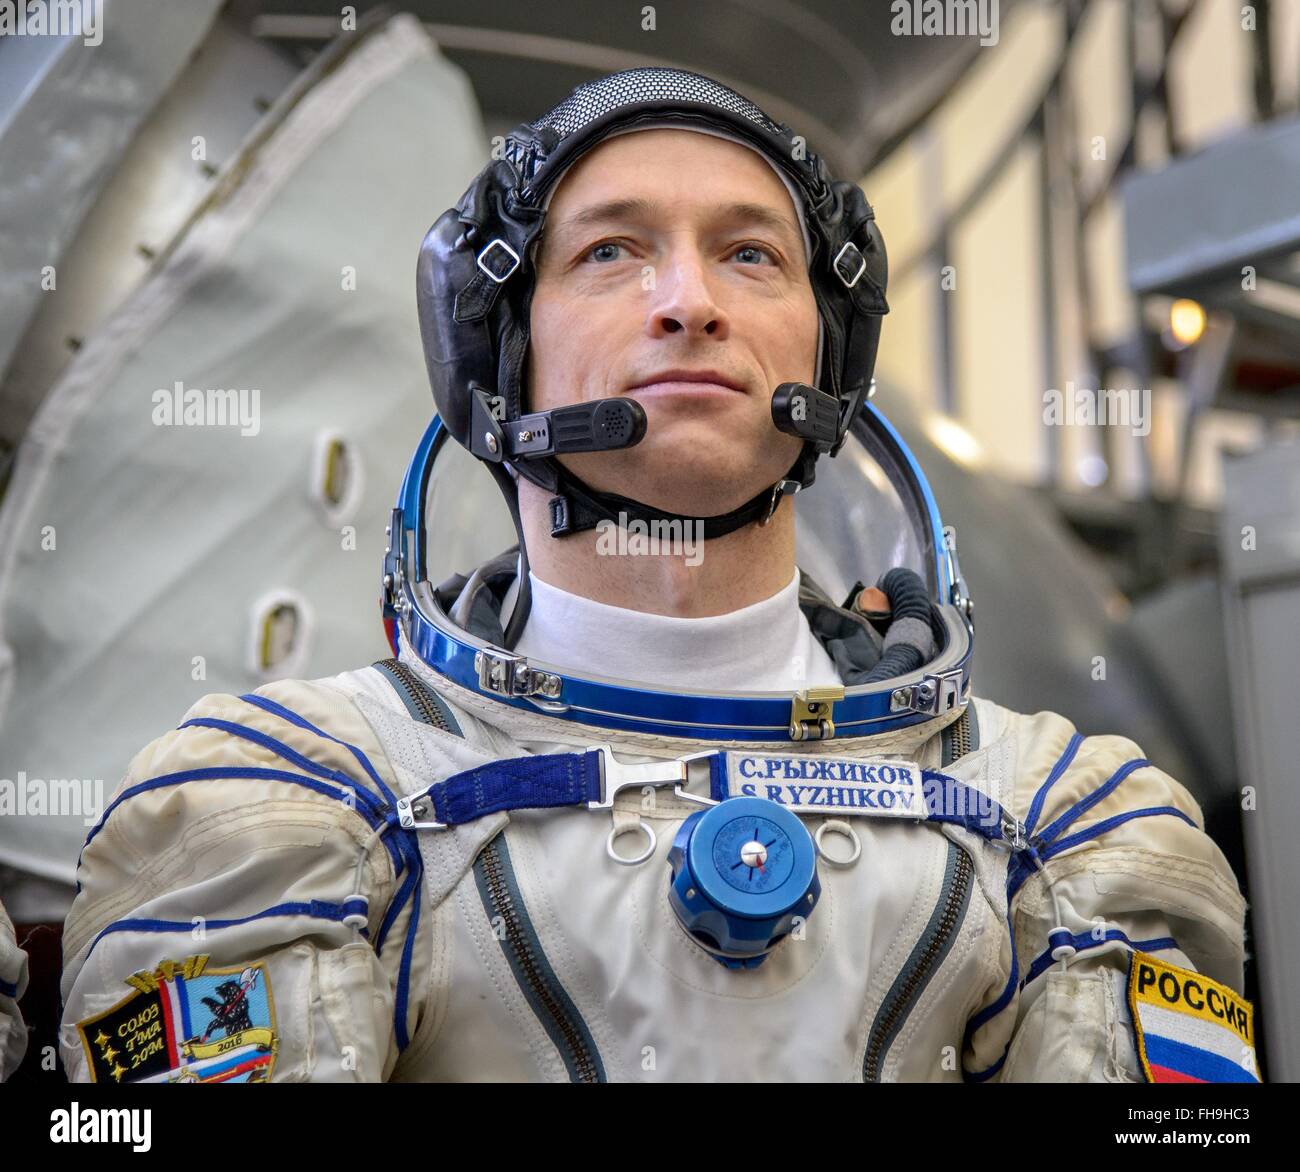 International Space Station Expedition 47 backup crew member Russian cosmonaut Sergei Ryzhikov answers questions from the press ahead of his Soyuz qualification exams at the Gagarin Cosmonaut Training Center February 24, 2016 in Star City, Russia. Stock Photo